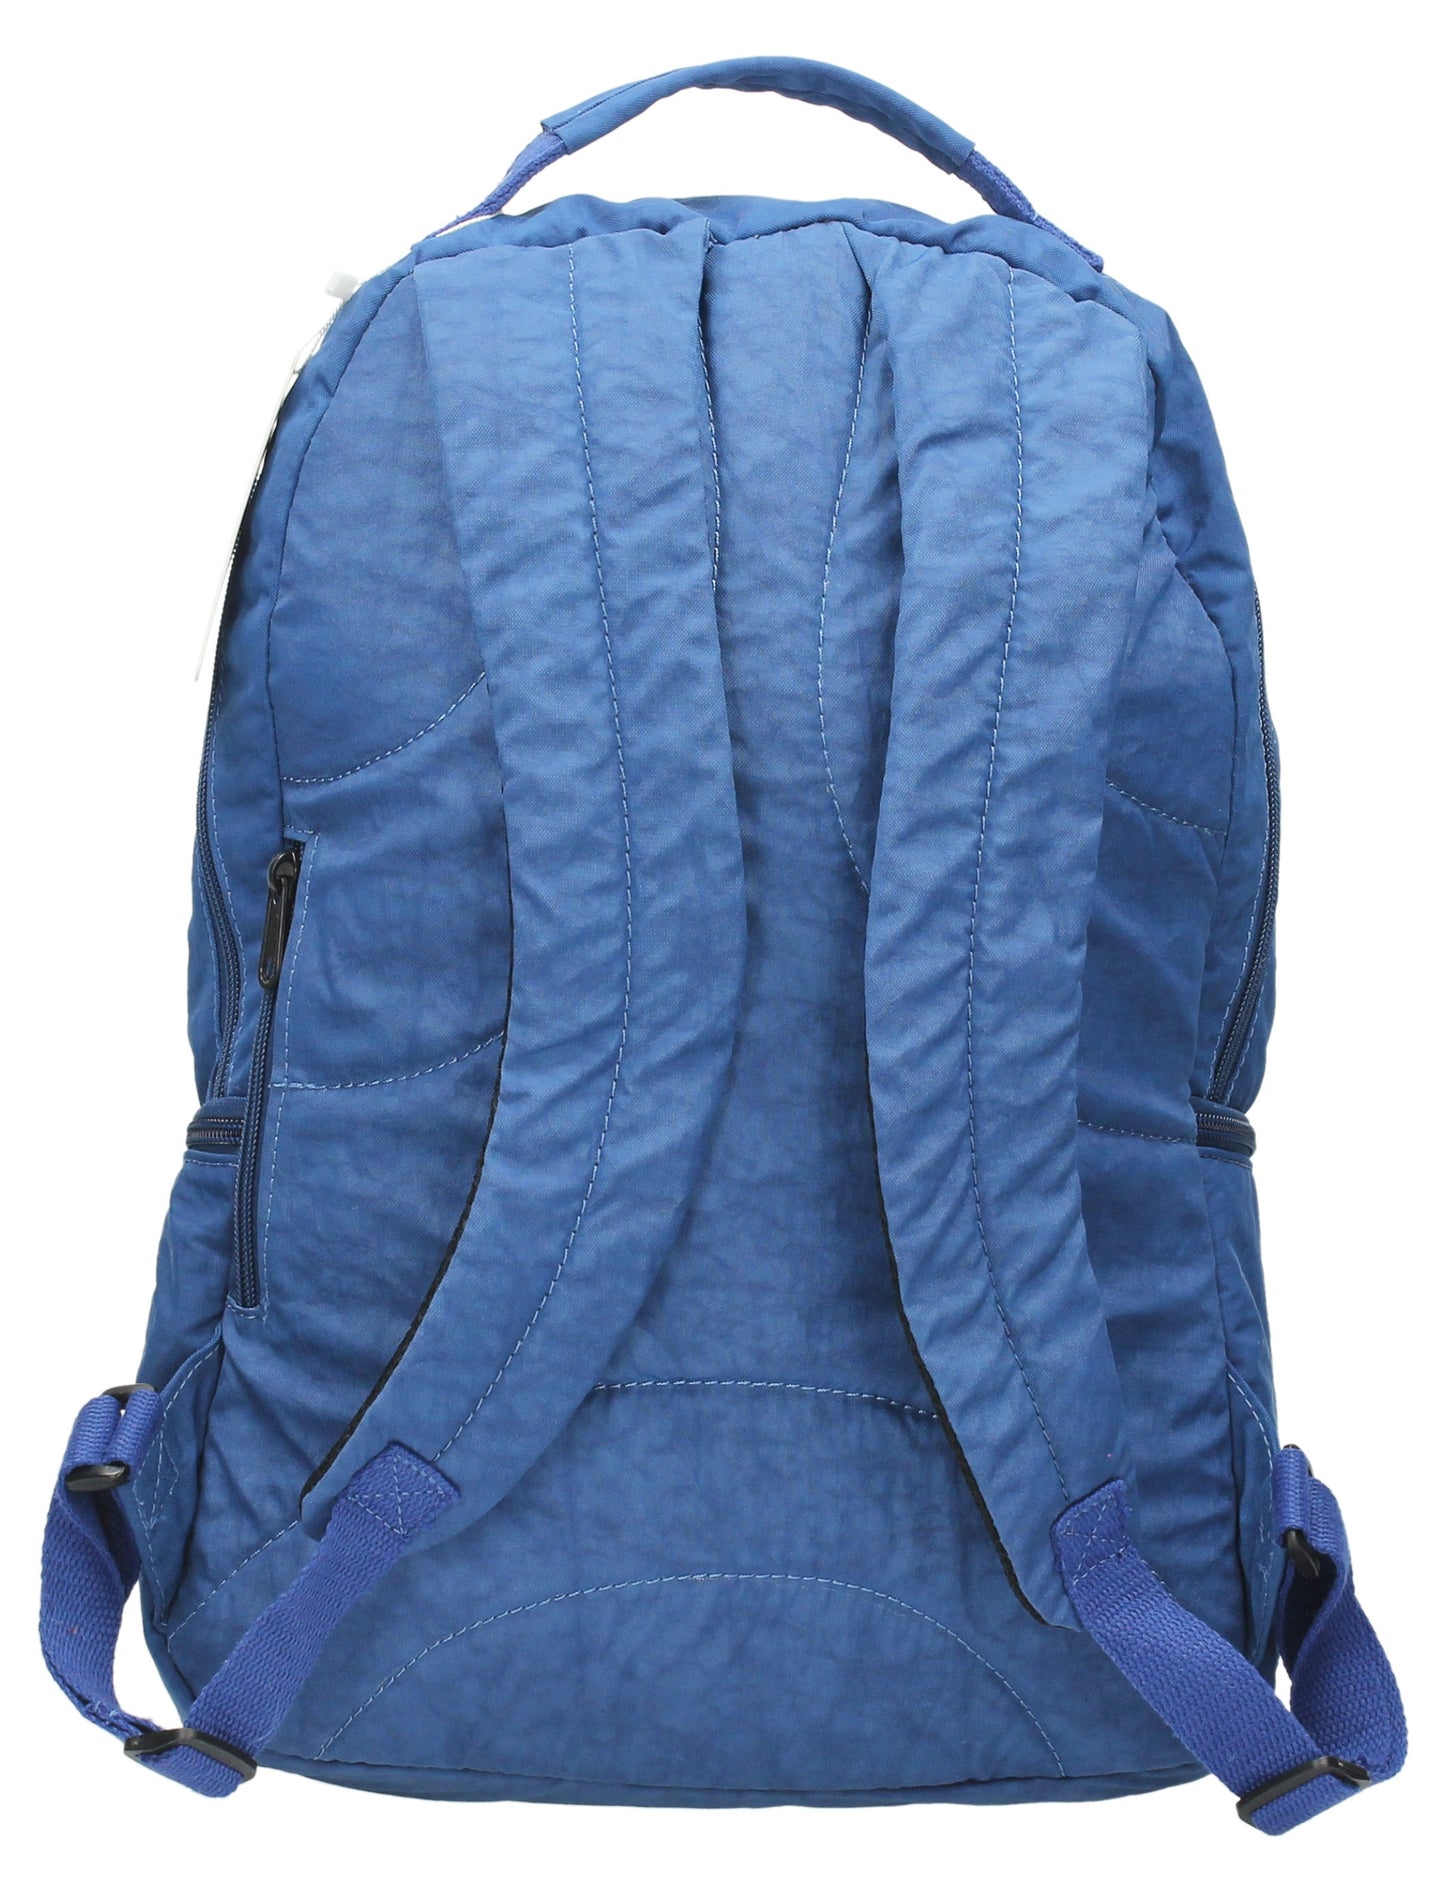 Joseph & Mary Baby Changing Backpack - Dark Blue-Baby Changing-SWANKYSWANS